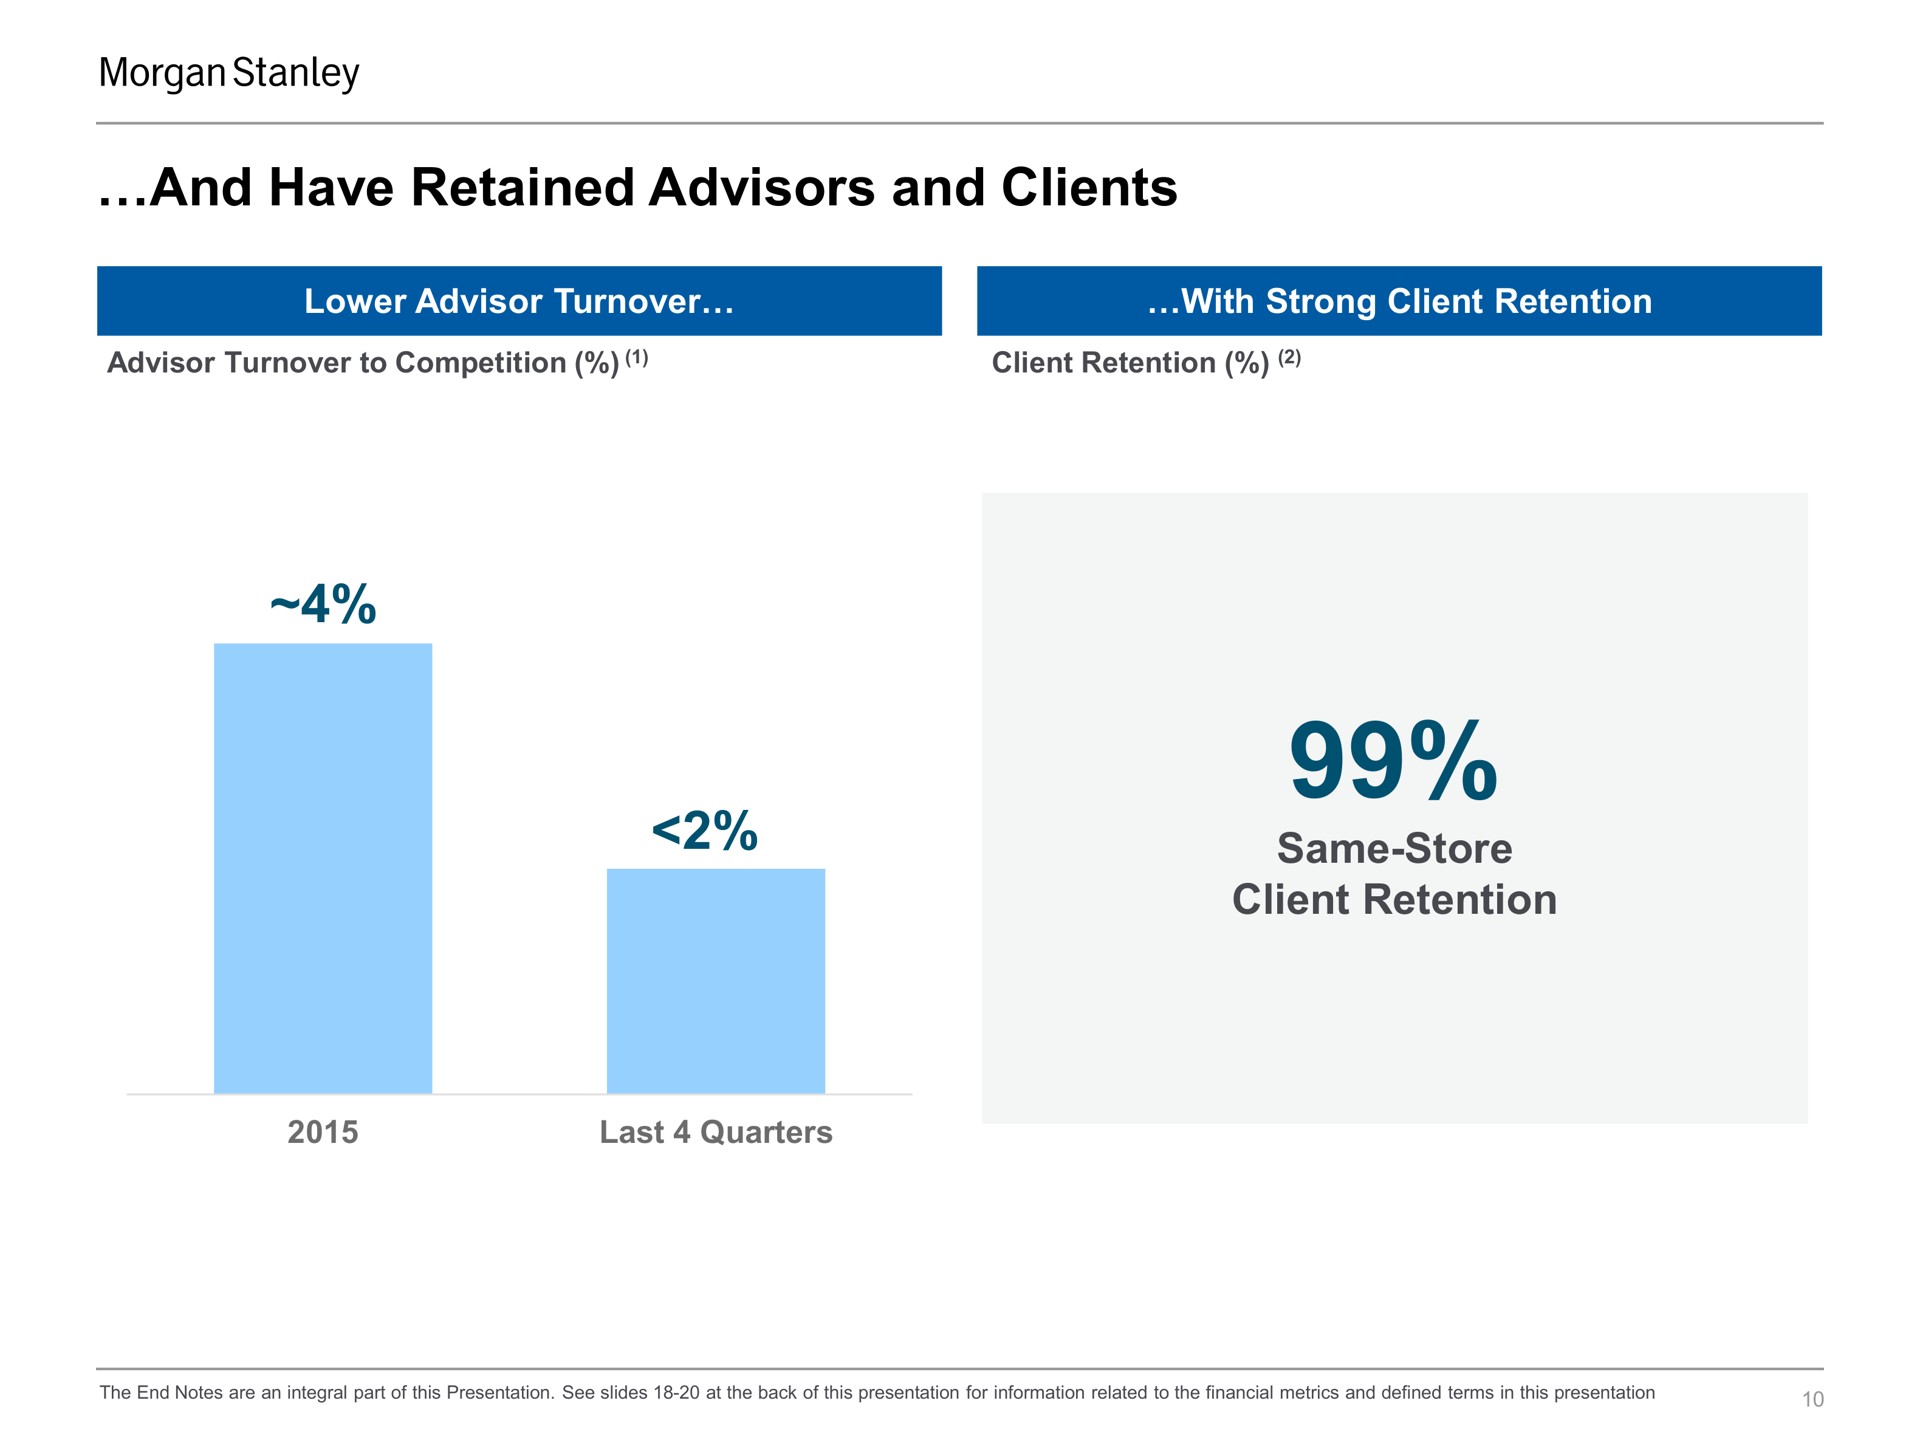 and have retained advisors and clients same store client retention a | Morgan Stanley